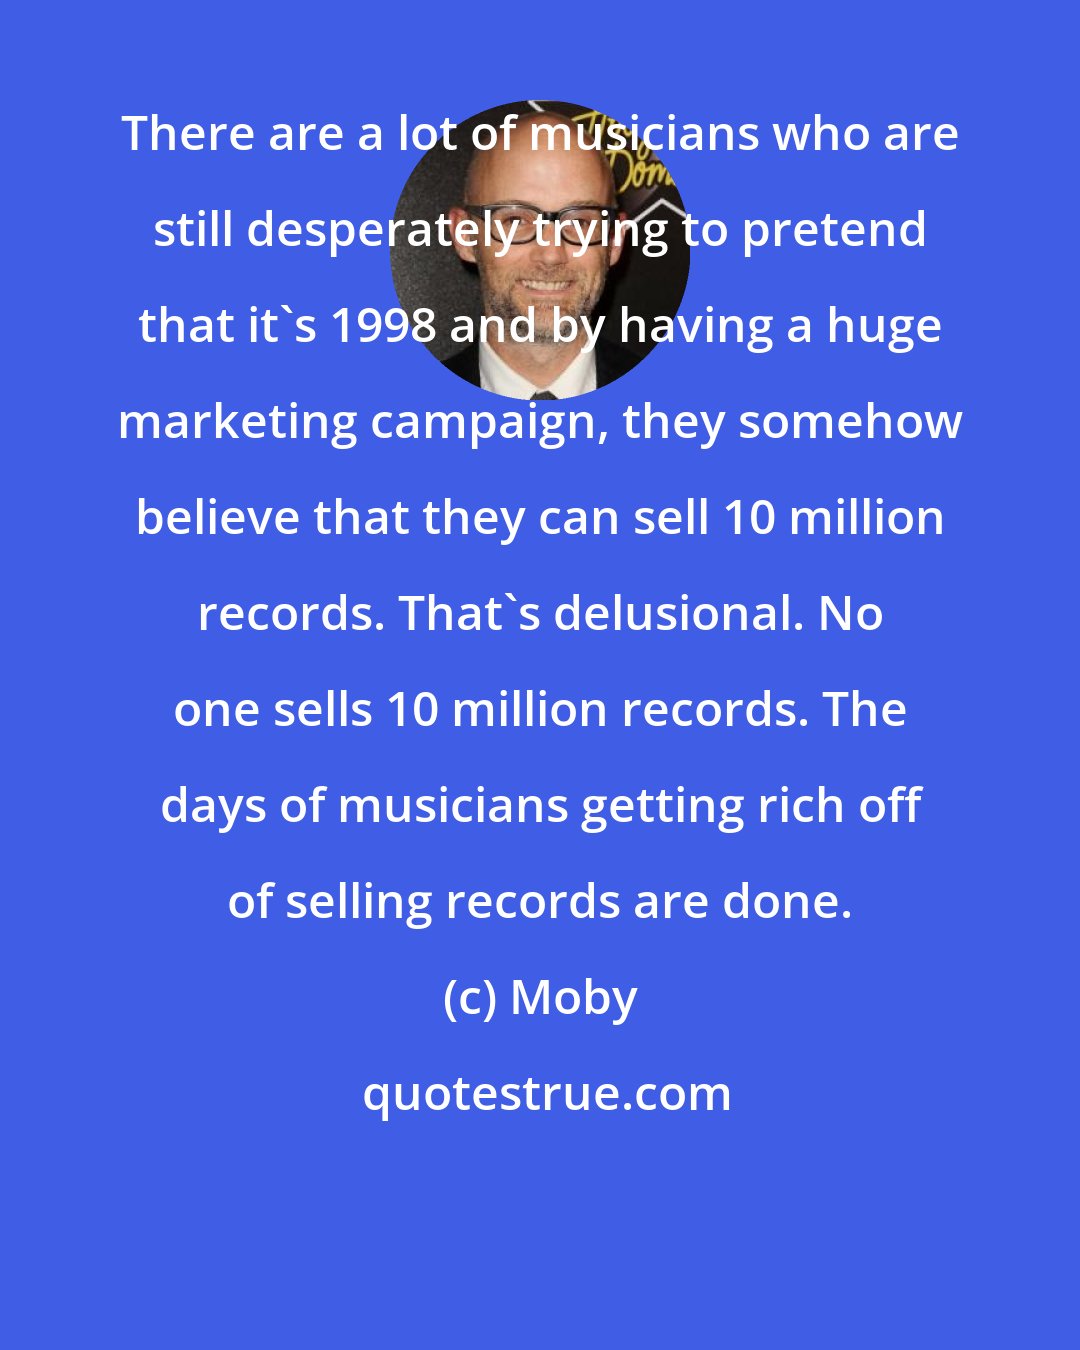 Moby: There are a lot of musicians who are still desperately trying to pretend that it's 1998 and by having a huge marketing campaign, they somehow believe that they can sell 10 million records. That's delusional. No one sells 10 million records. The days of musicians getting rich off of selling records are done.